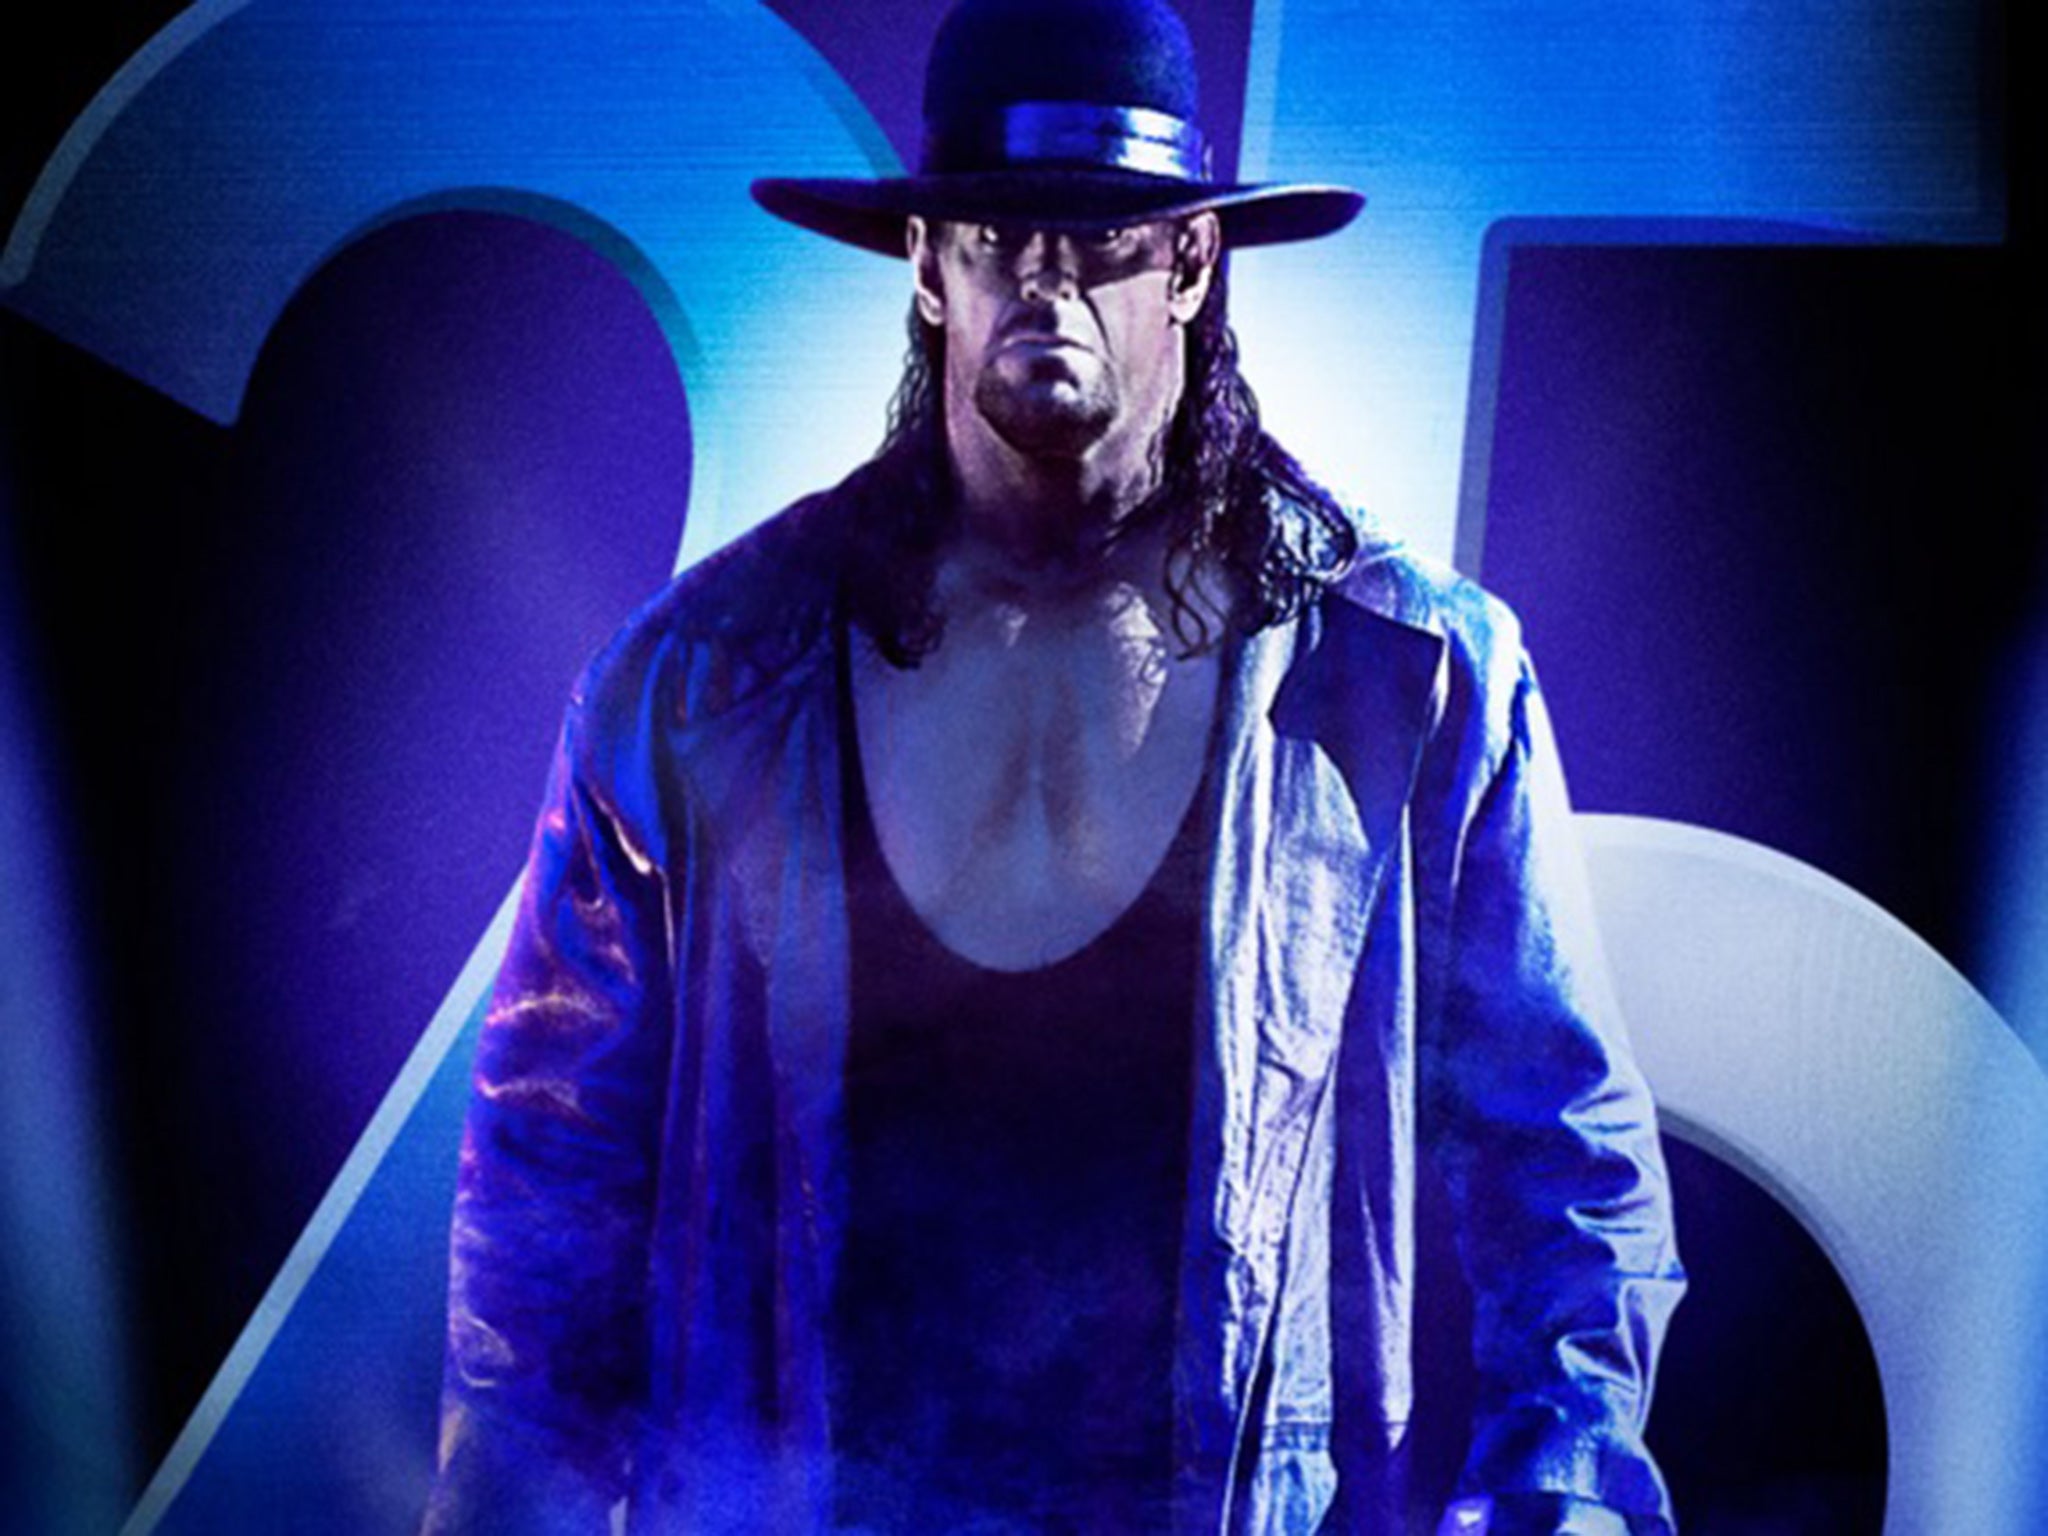 The Undertaker would be a great addition to the Big Brother House